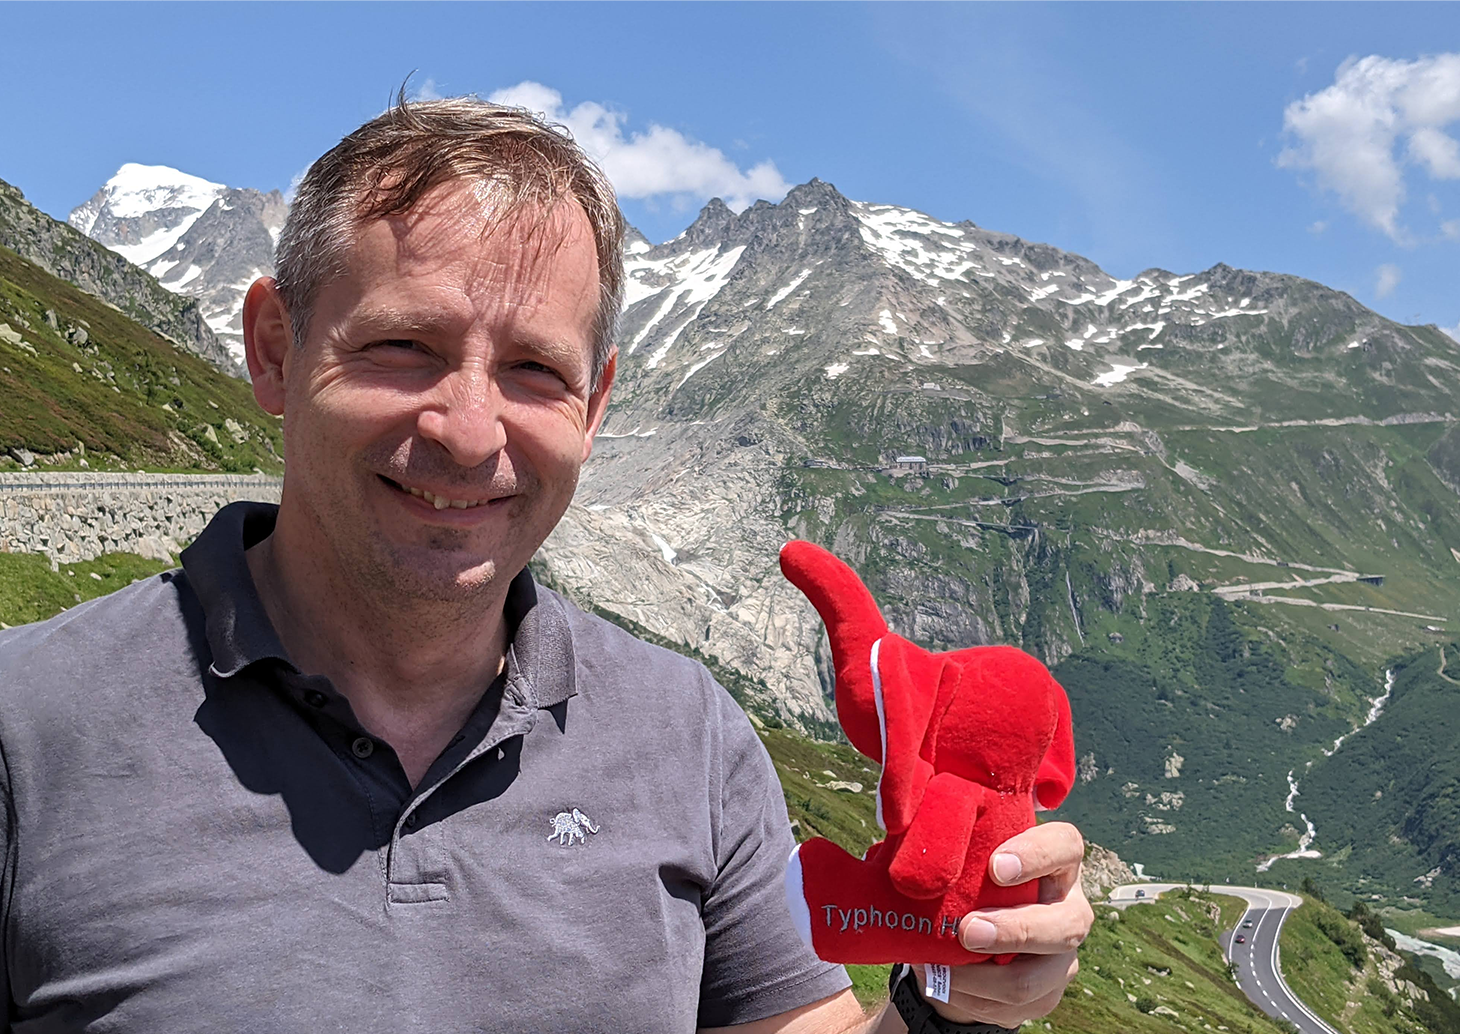 A man standing in front of mountains, holding a stuffed elephant and smiling.